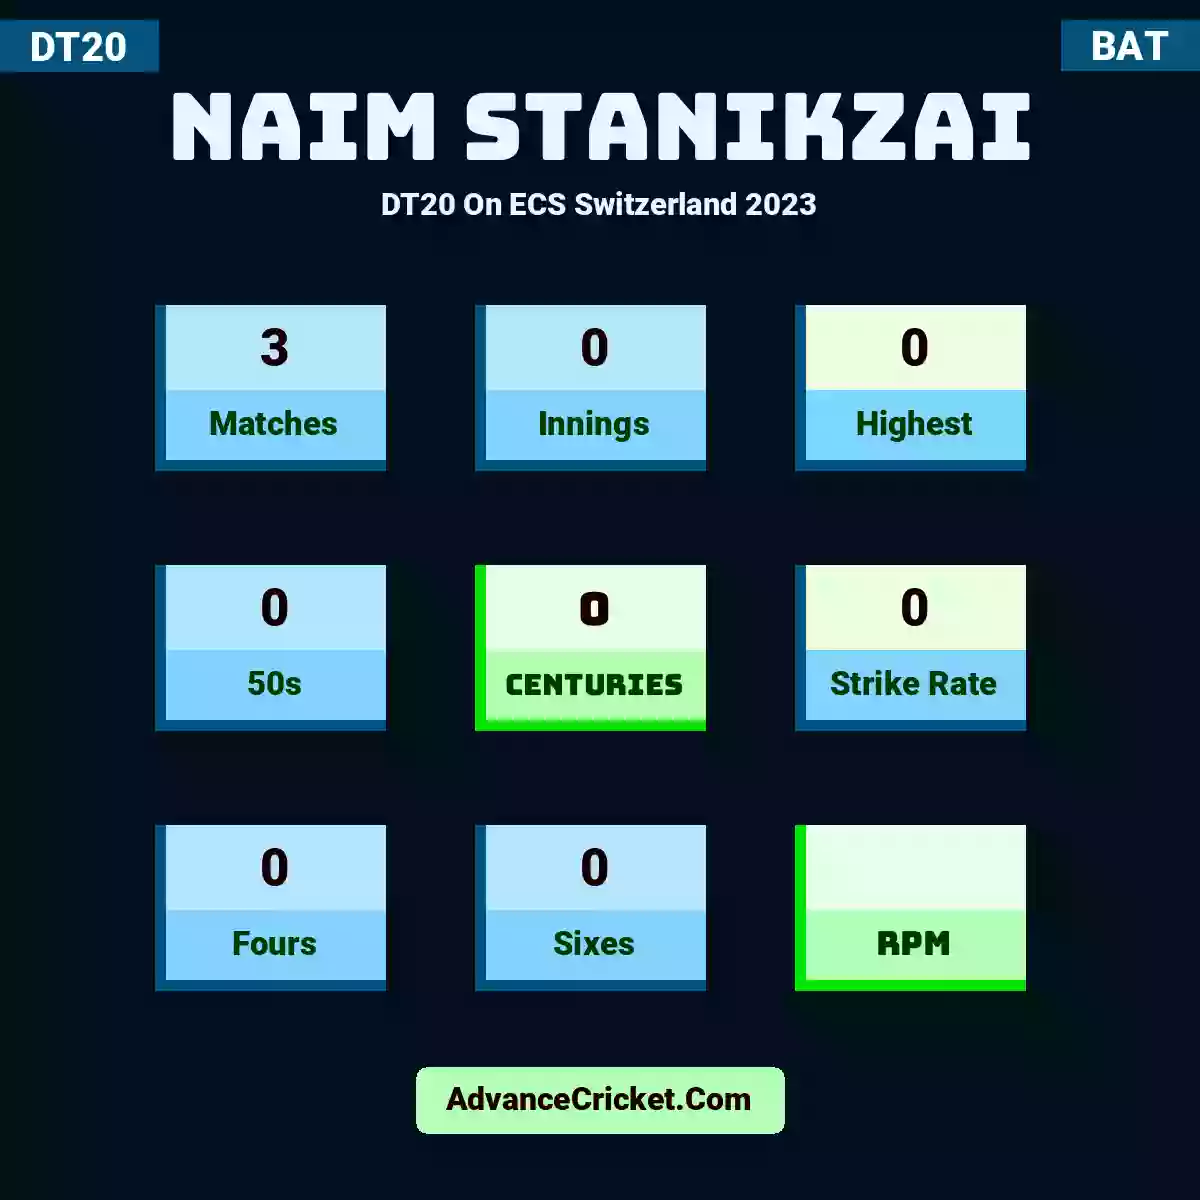 Naim Stanikzai DT20  On ECS Switzerland 2023, Naim Stanikzai played 3 matches, scored 0 runs as highest, 0 half-centuries, and 0 centuries, with a strike rate of 0. N.Stanikzai hit 0 fours and 0 sixes.